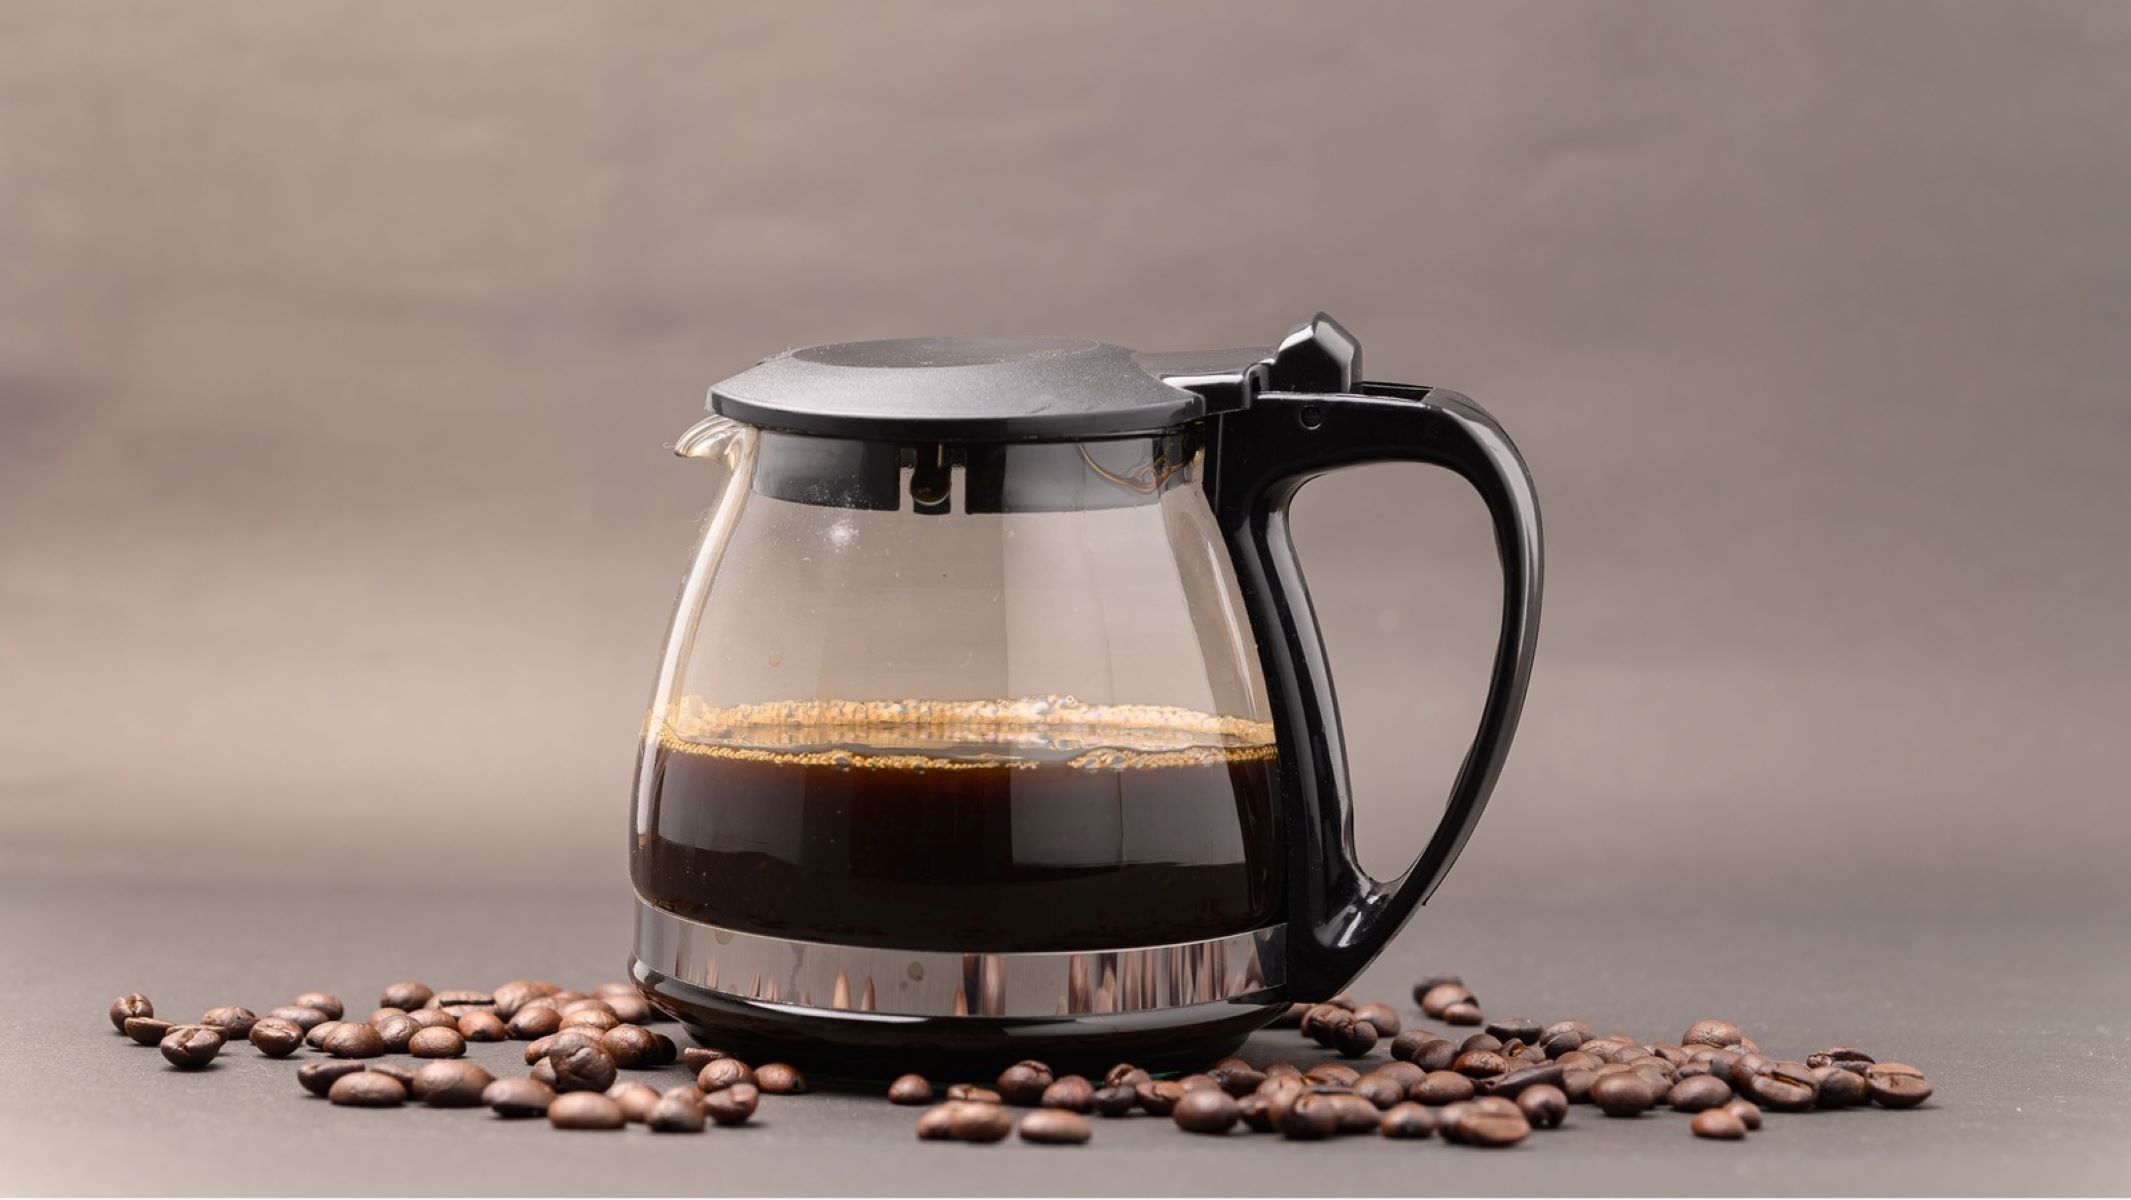 How To Clean A Glass Coffee Carafe